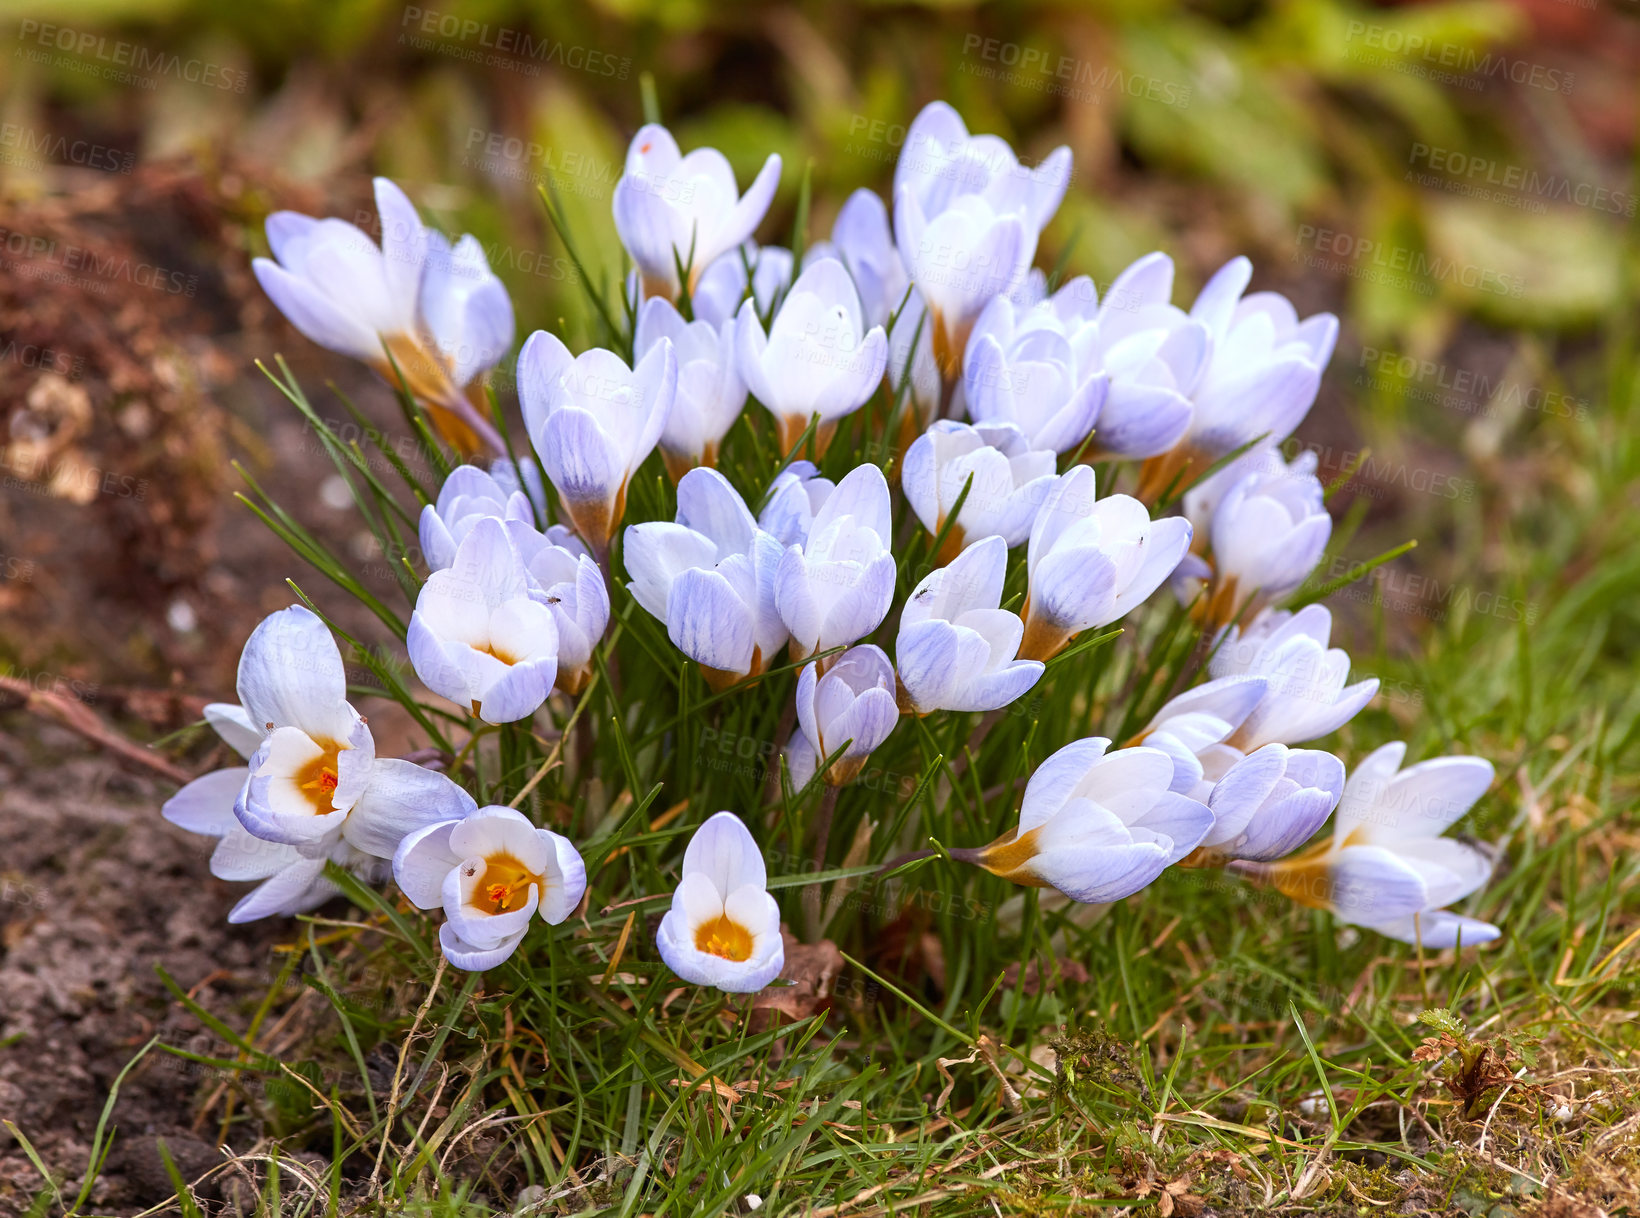 Buy stock photo Crocus flower plant growing in a backyard garden during summer. Flowers flourishing in a lush green park during springtime from above. Top view of wildflowers blossoming in a grassy meadow or field
